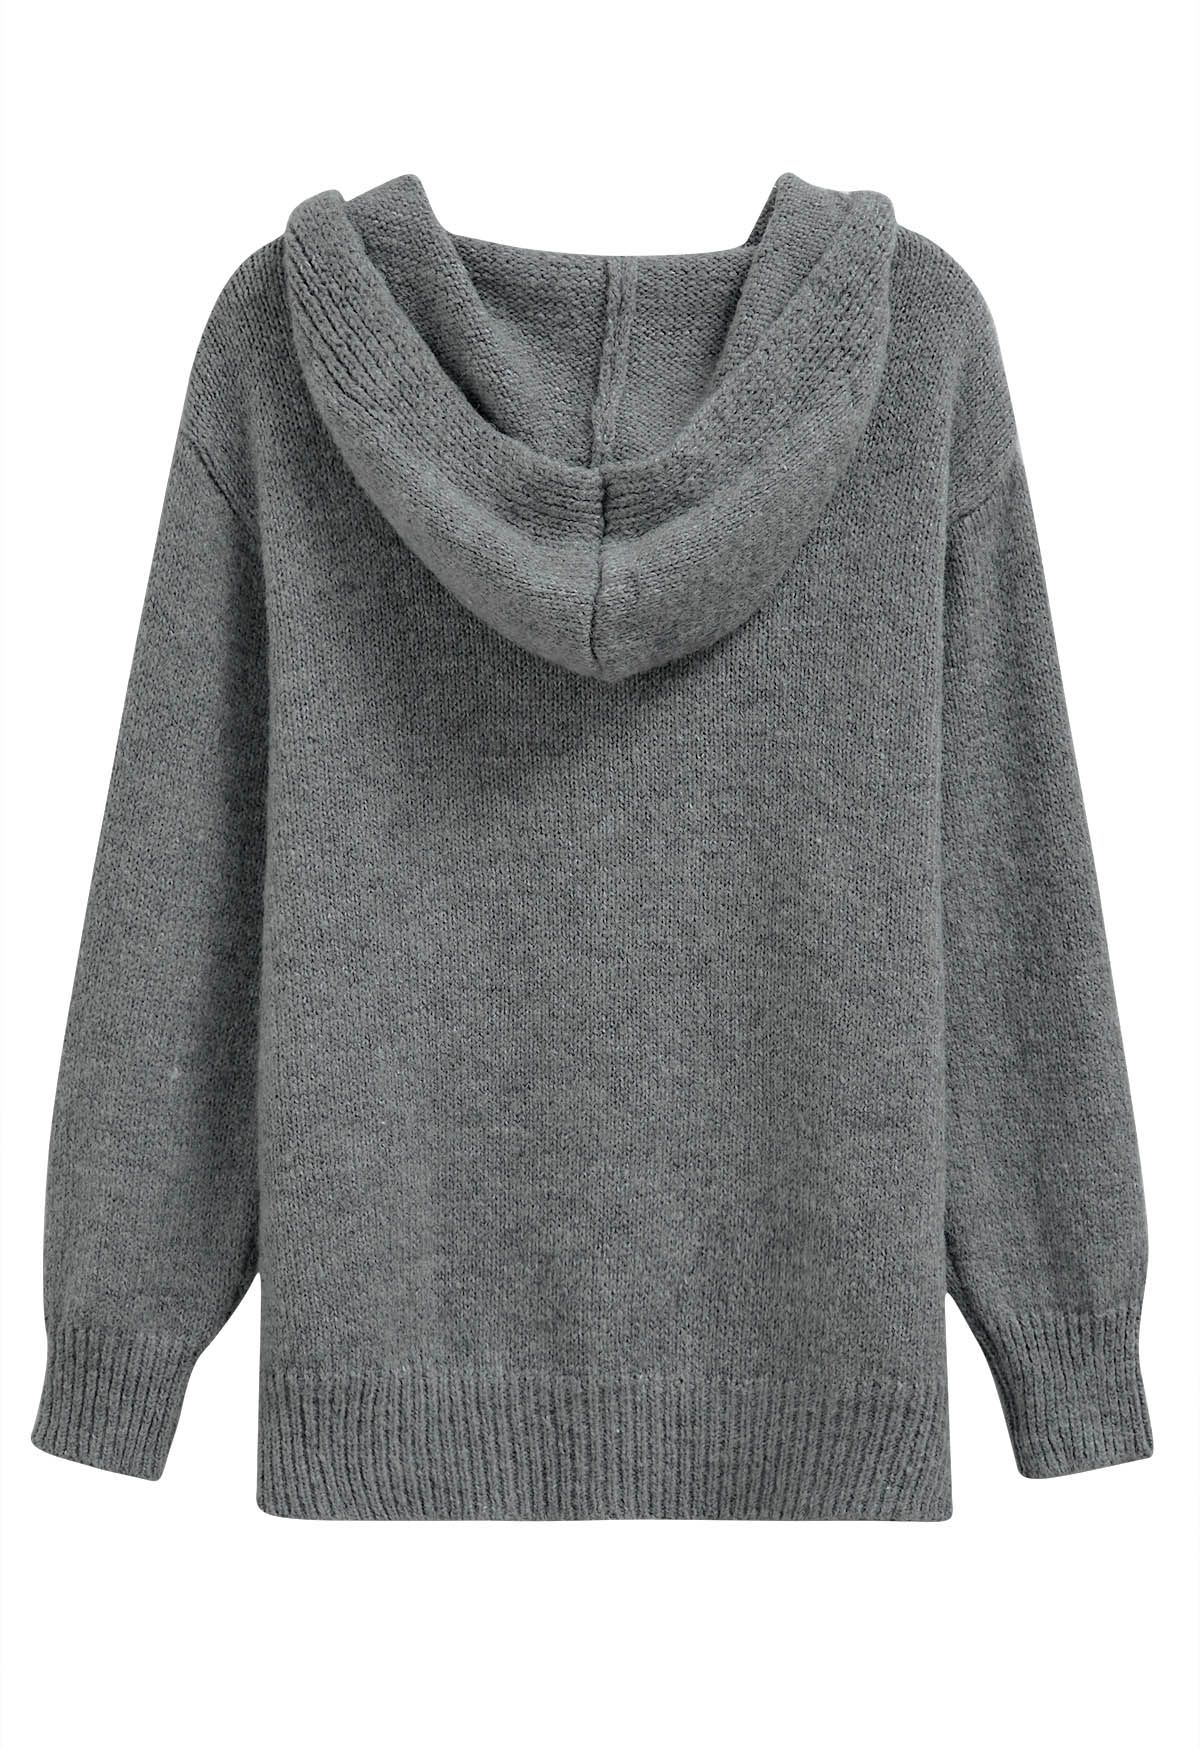 Horn Button Hooded Knit Cardigan